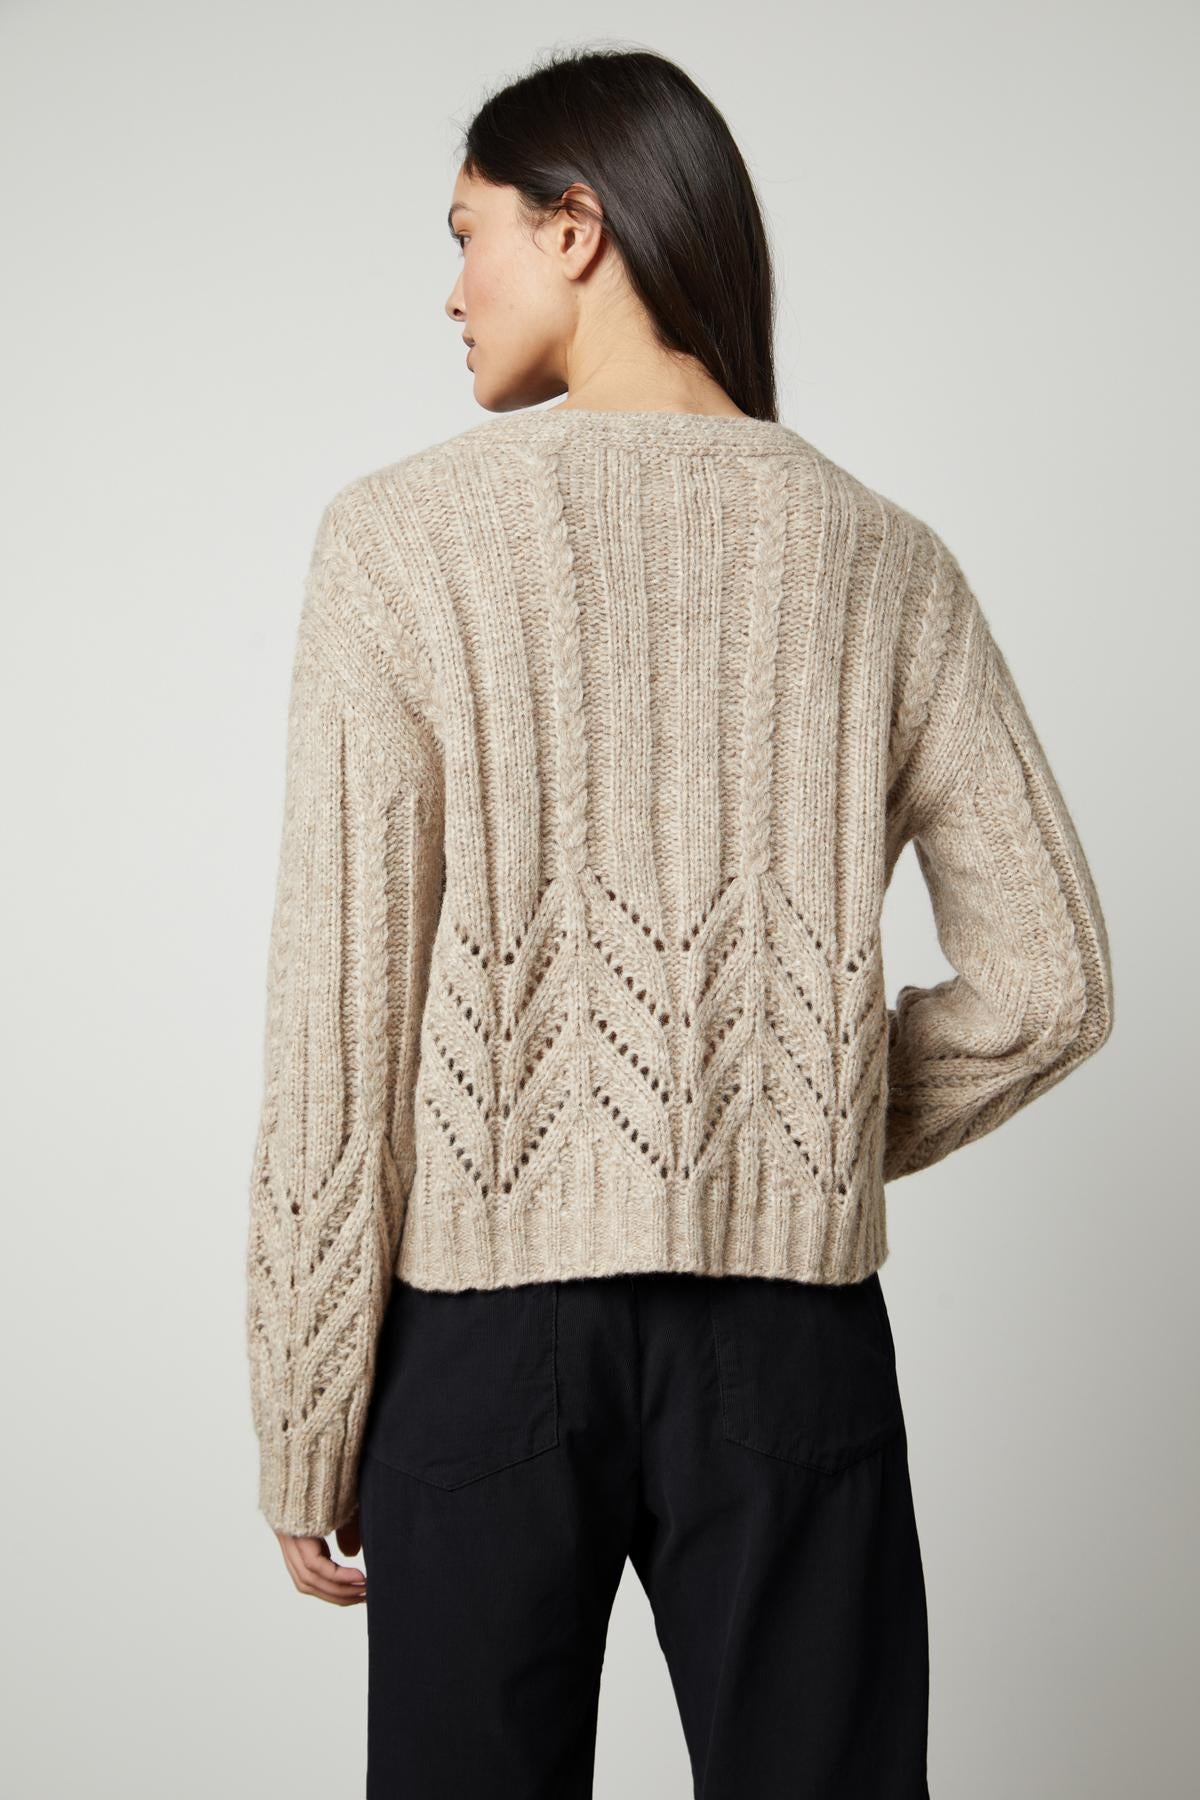 The back view of a woman wearing a Velvet by Graham & Spencer HAZEL ALPACA CABLE KNIT CARDIGAN sweater.-26897822384321